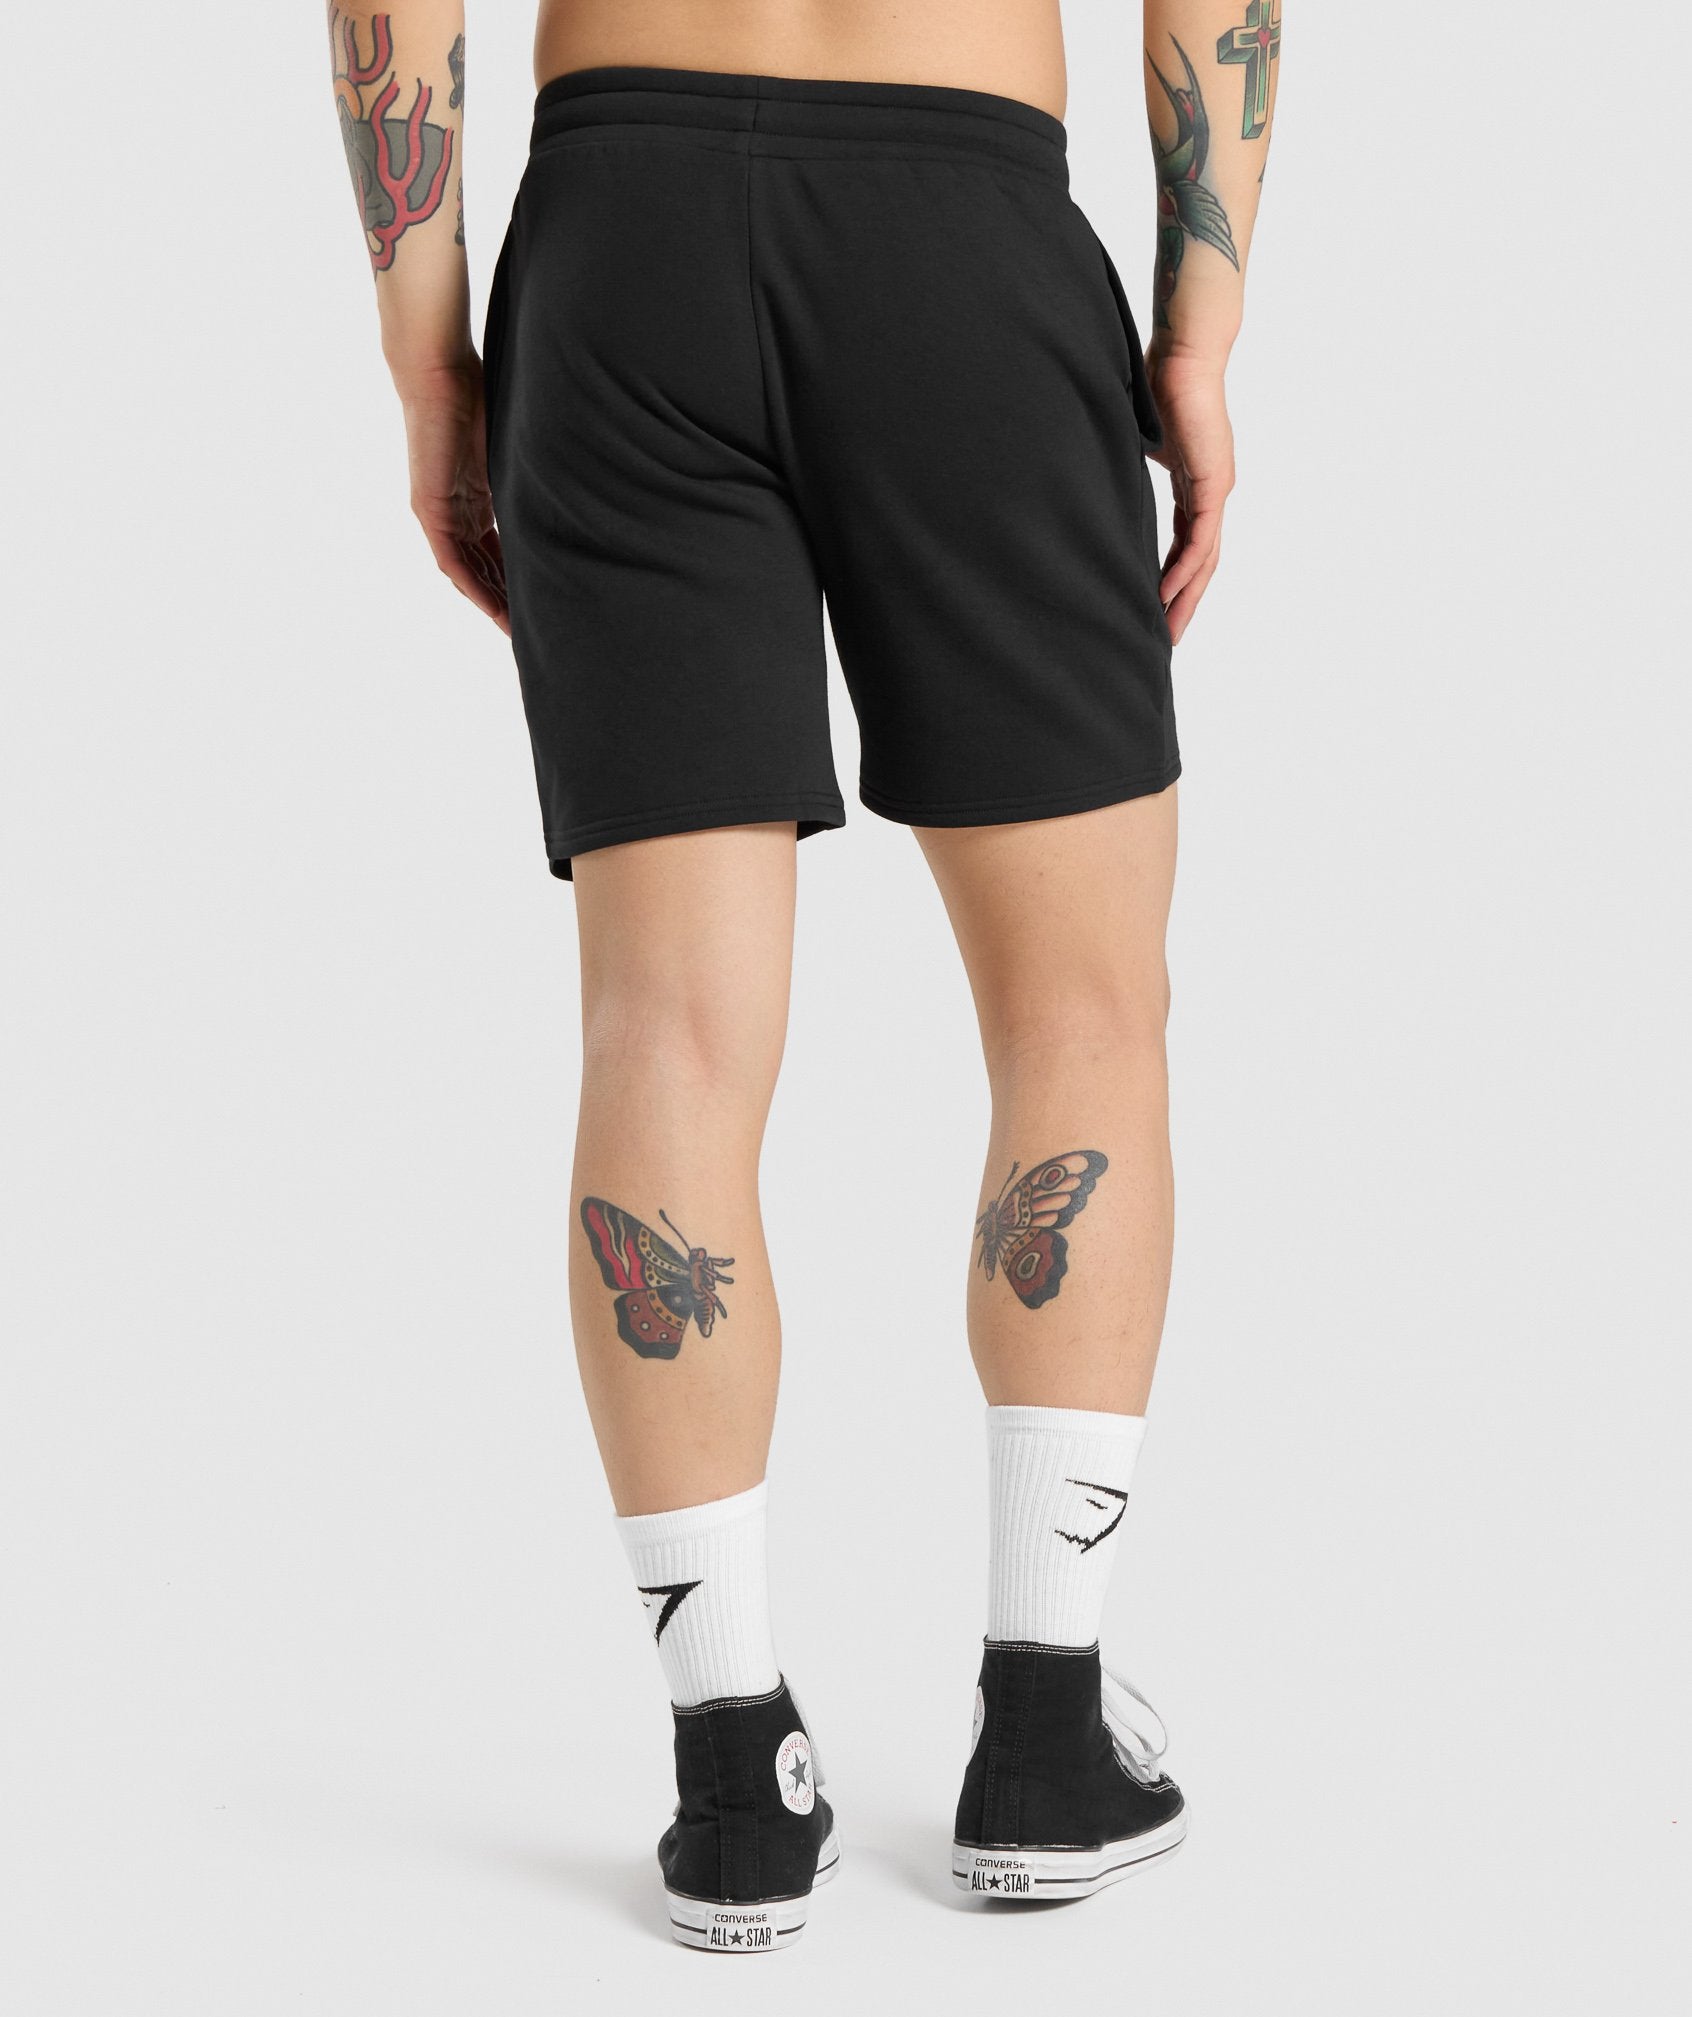 Legacy Shorts in Black/White - view 3